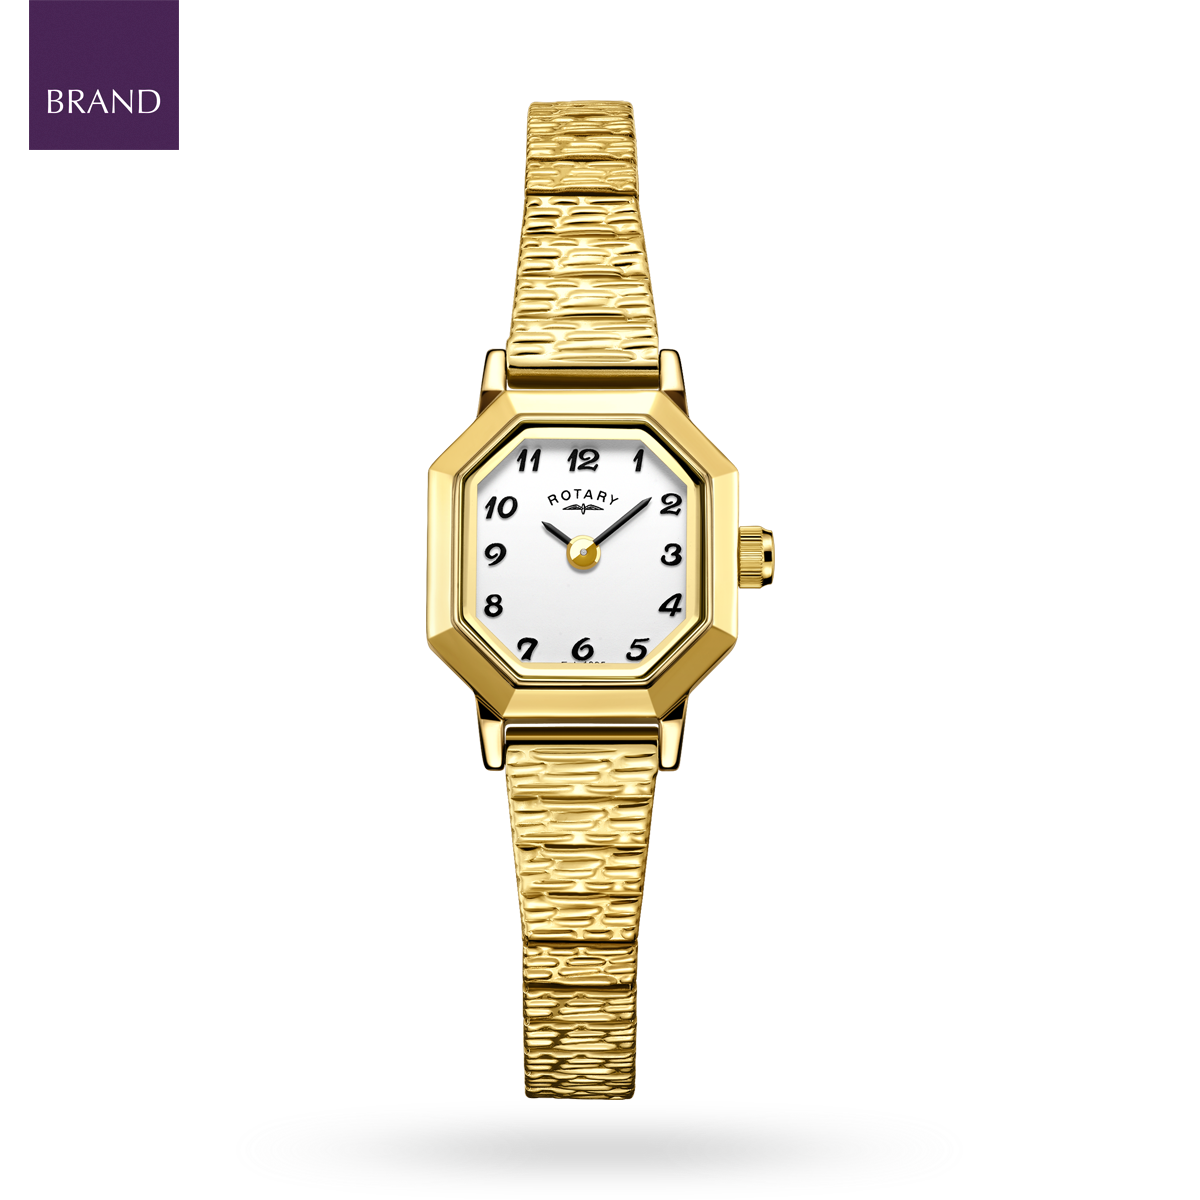 Rotary Expander Watch, Octagon Shaped White Dial with Gold Plated Bracelet - LB00764/29